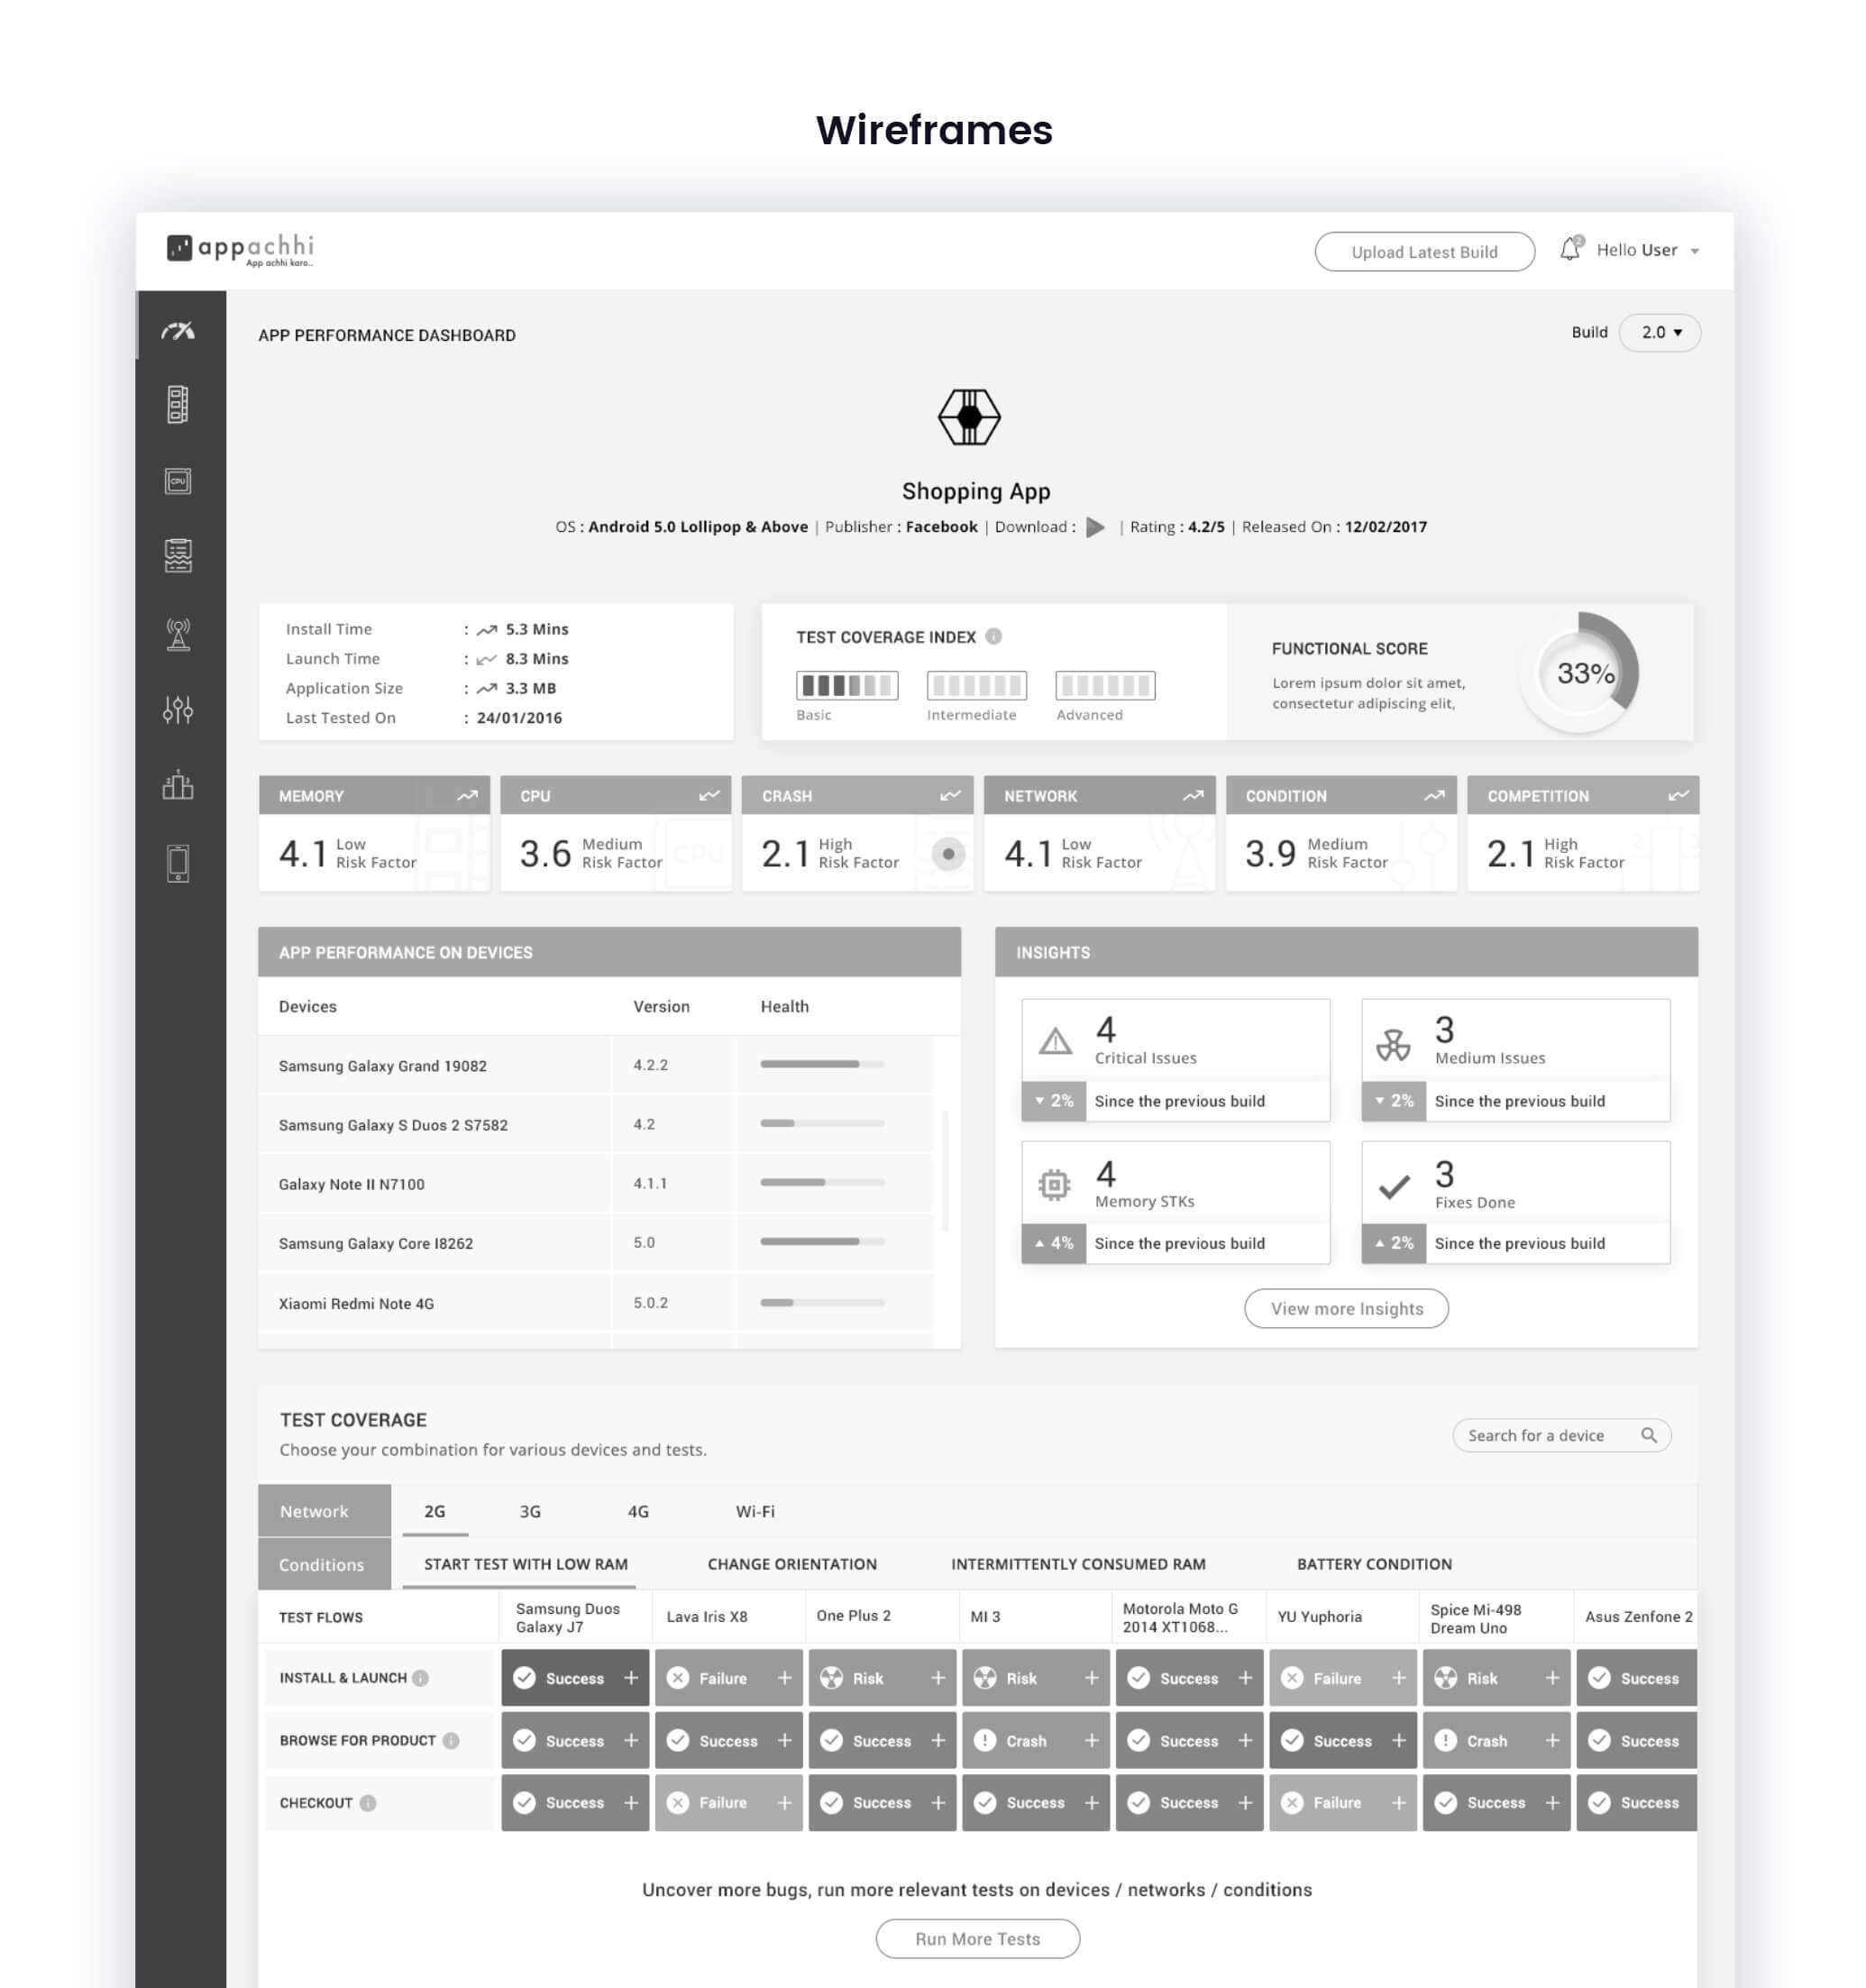 Wireframe for the dashboard